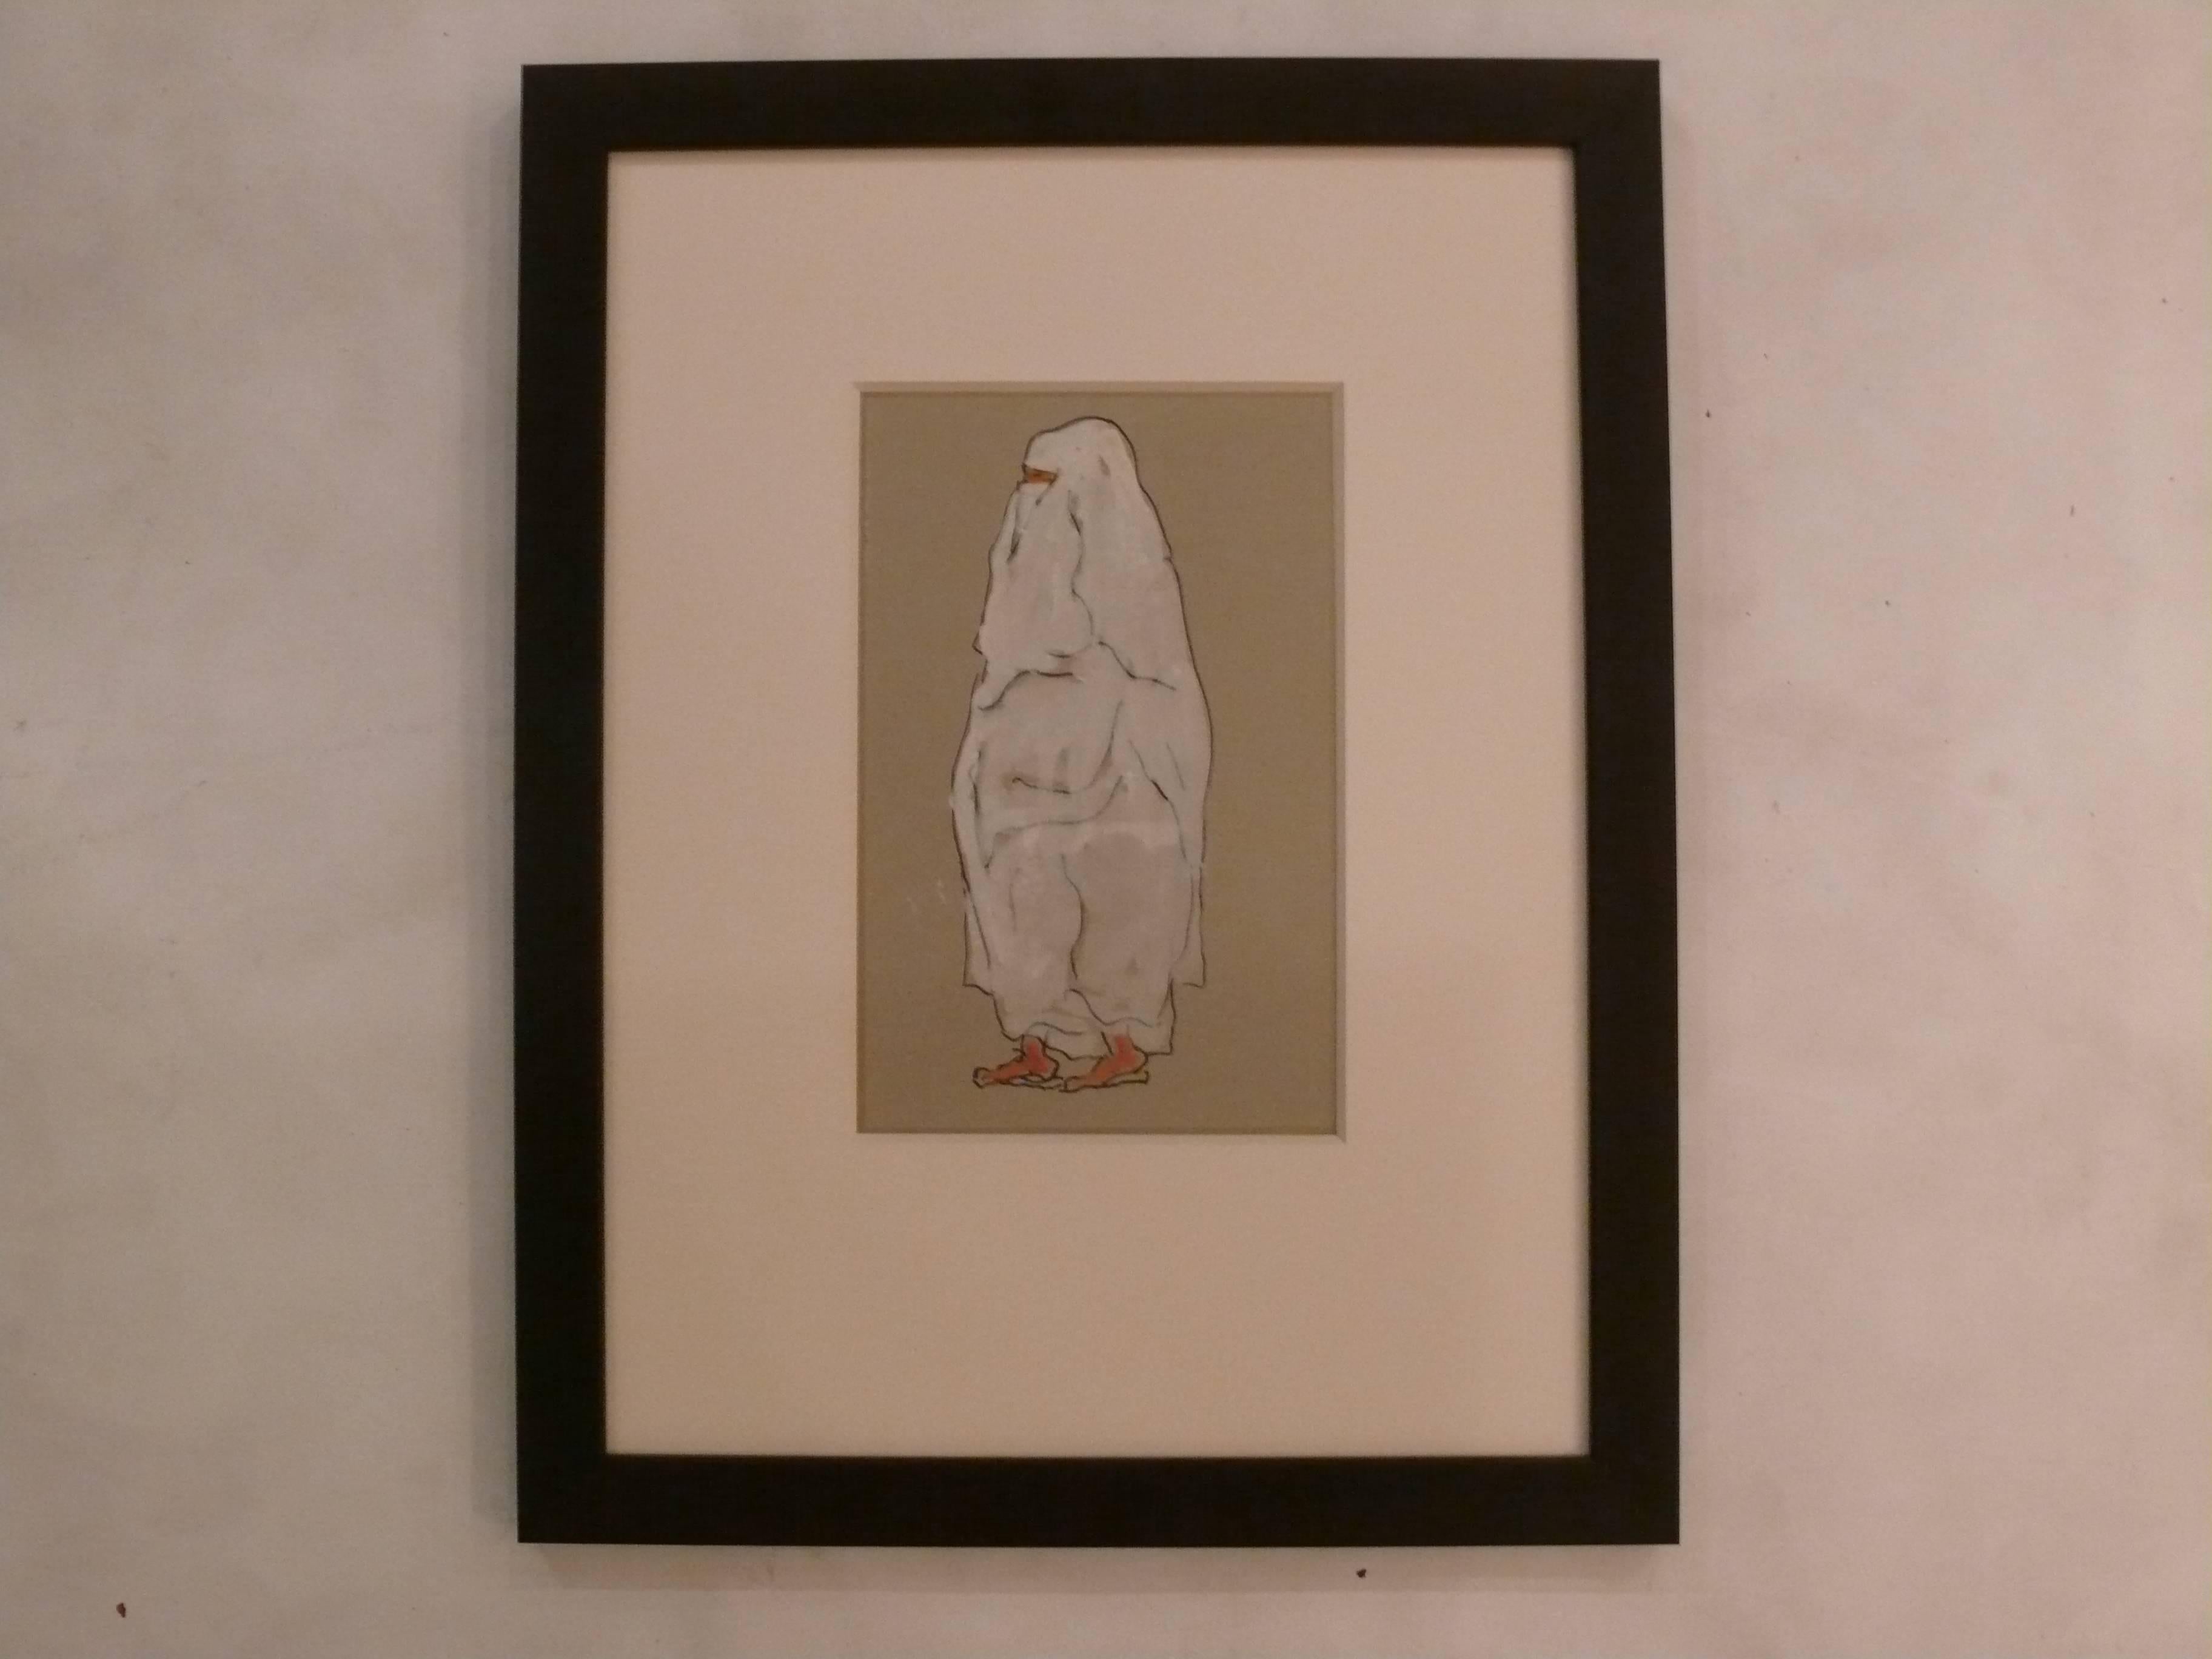 Pair of drawings by Jean Negulesco done by him while filming in Morocco. 
Signed with his initials.